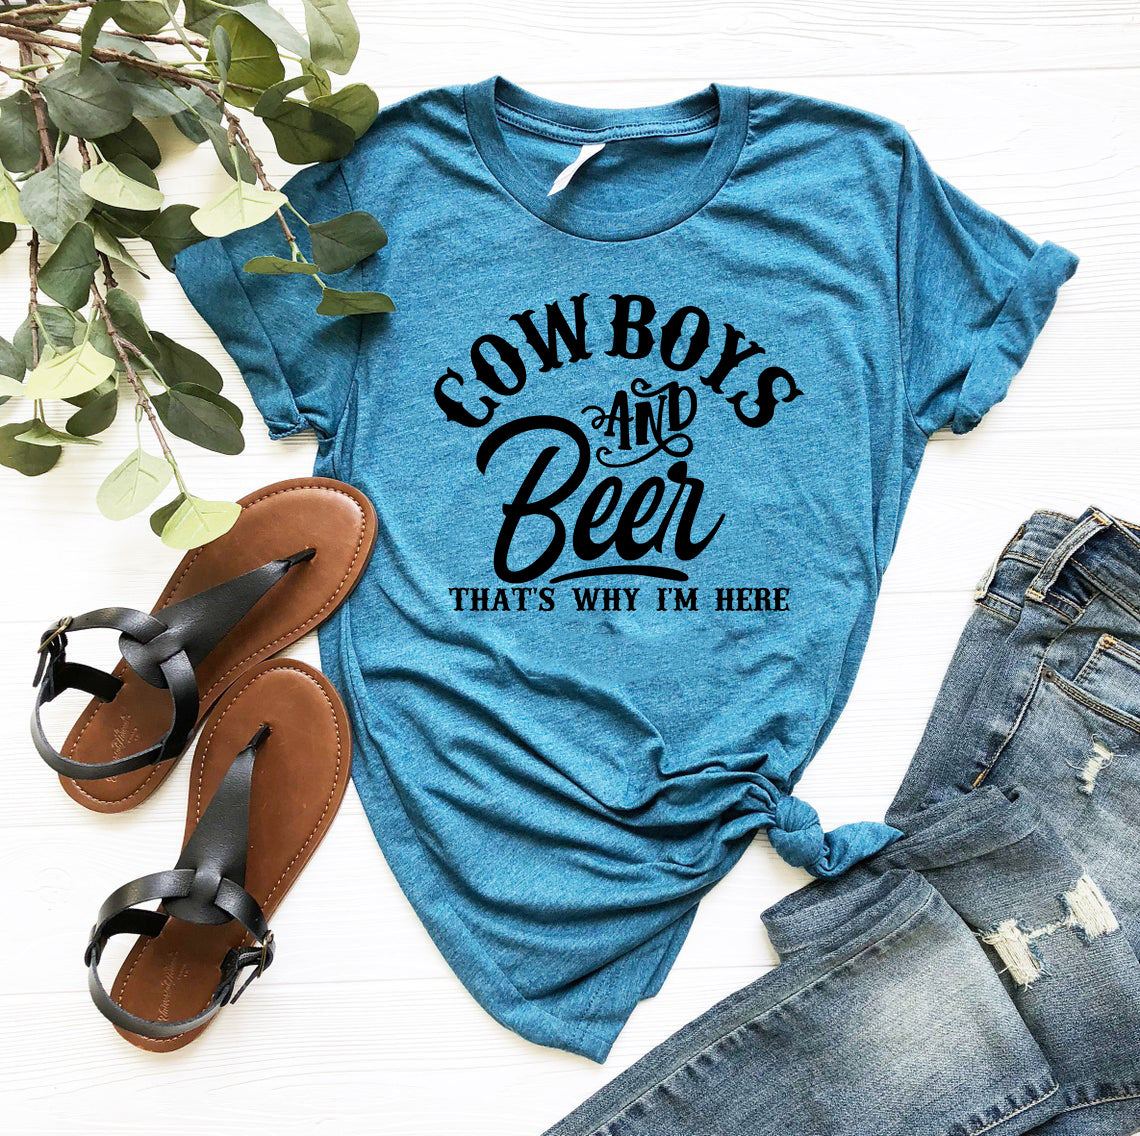 Cow boys and beer that's why I'm here Shirt